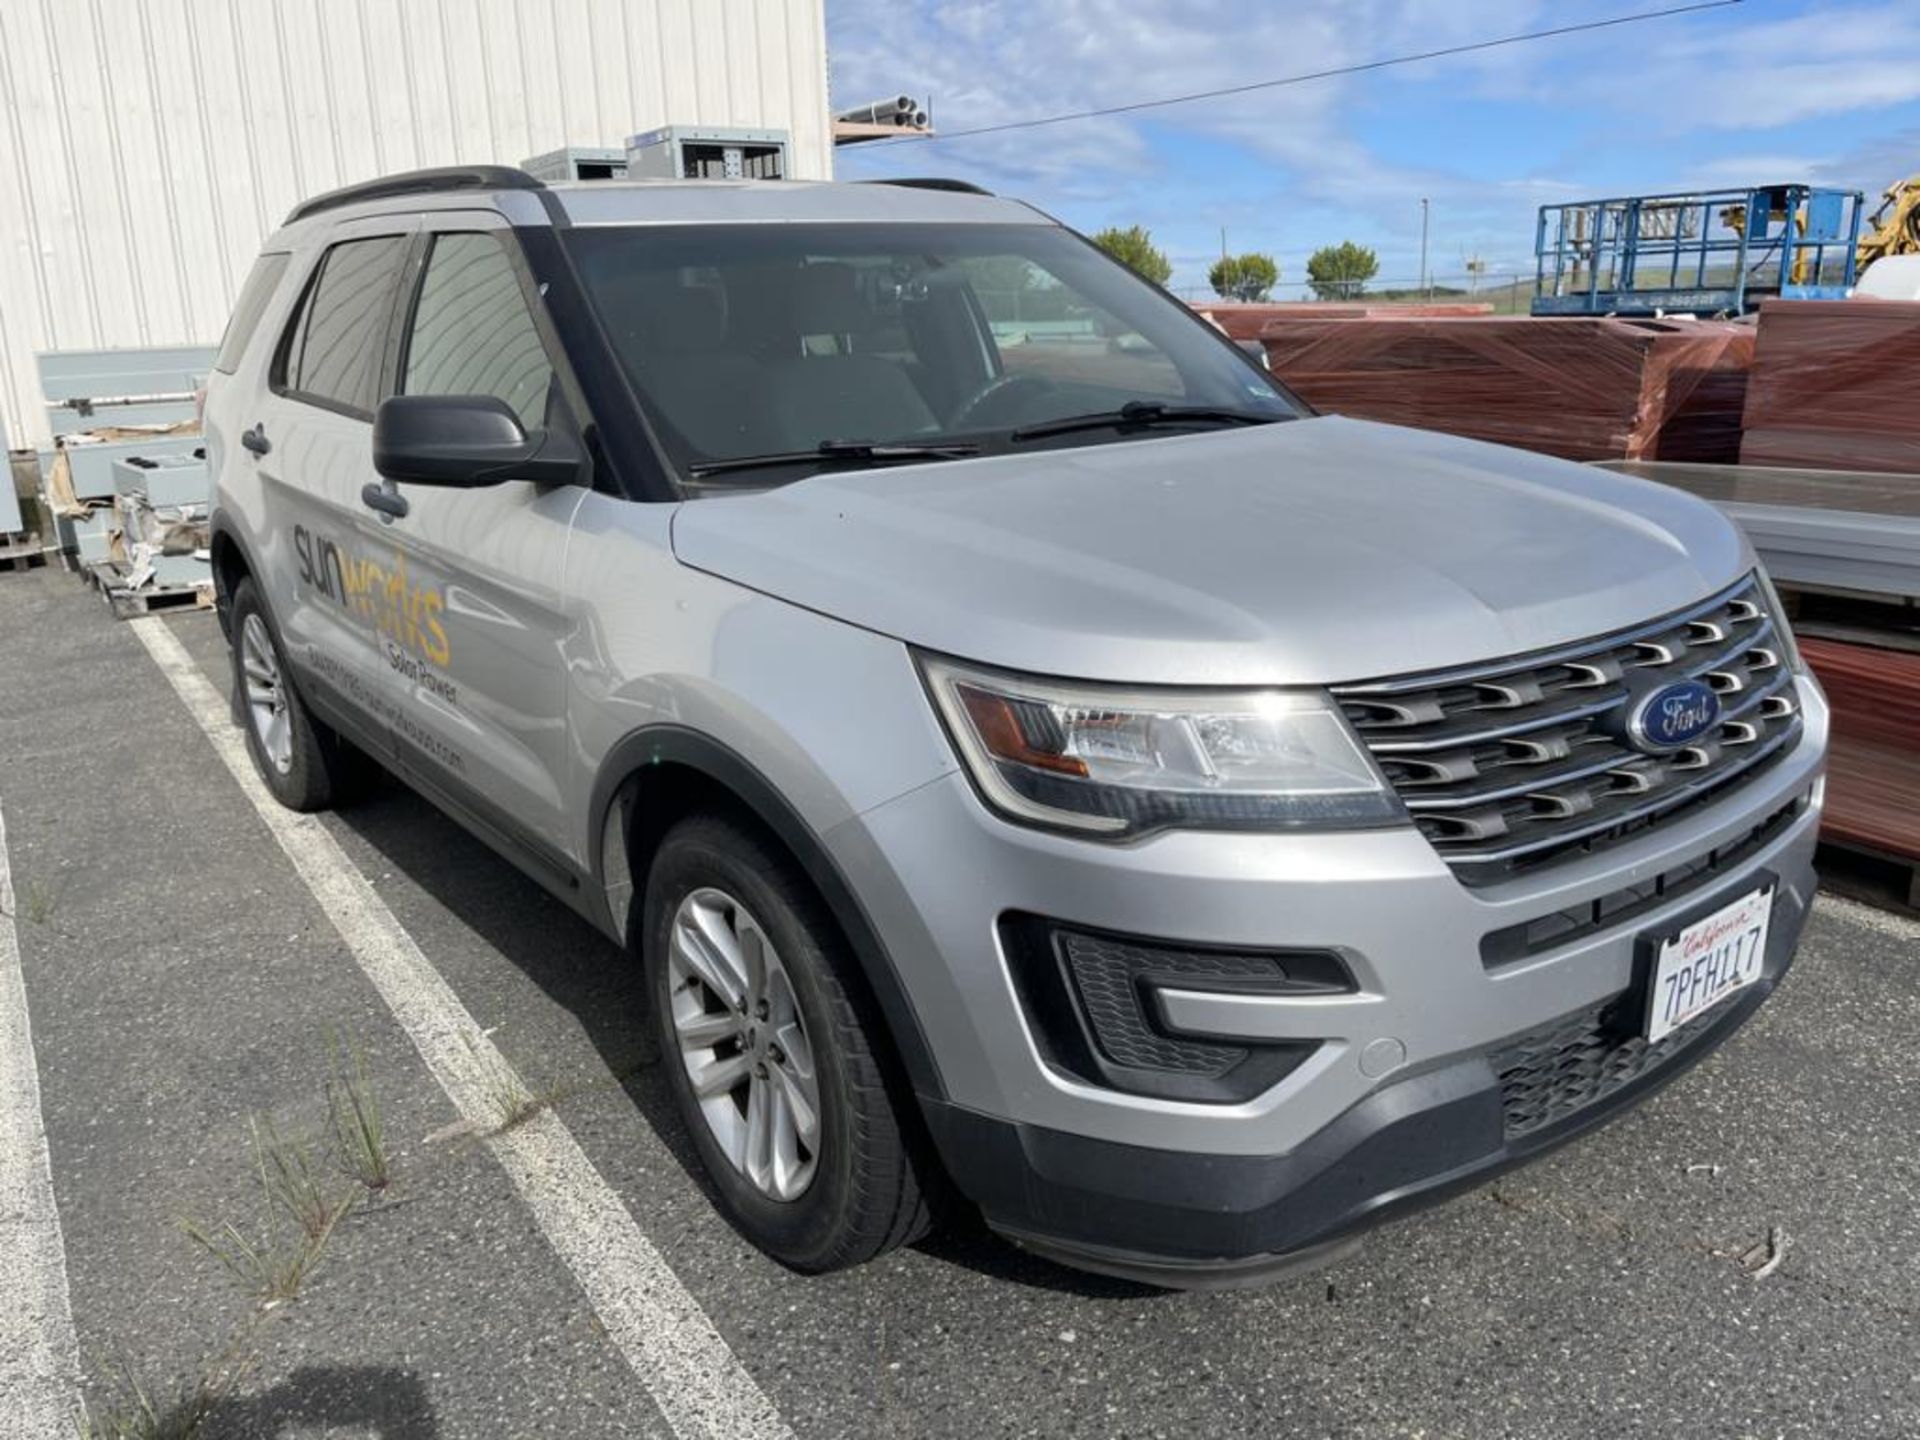 Ford Explorer SUV - Image 2 of 11